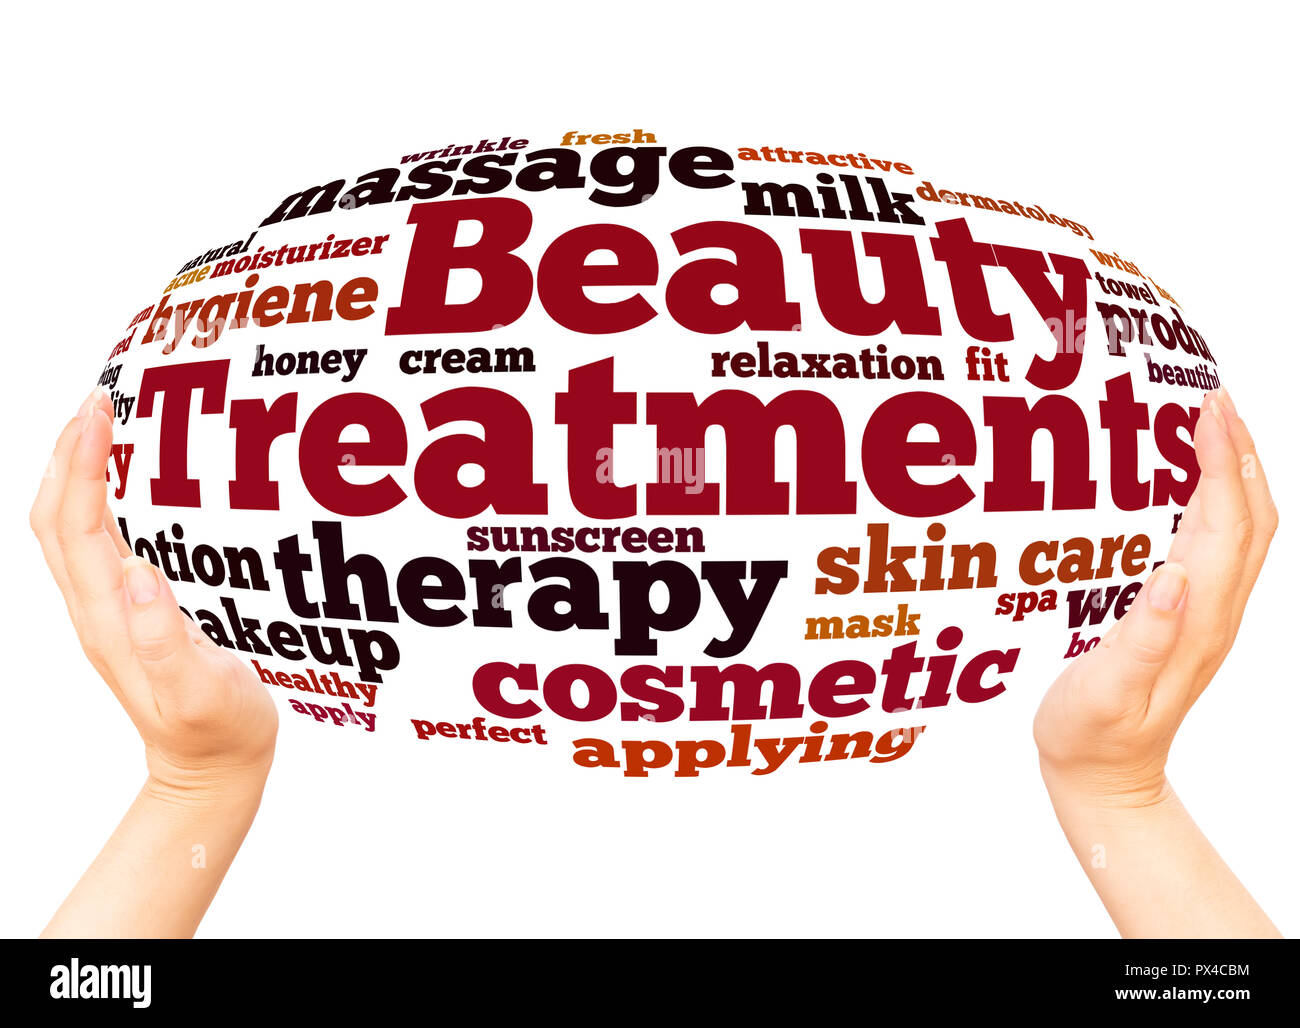 Beauty Treatments word cloud hand sphere concept on white background. Stock Photo